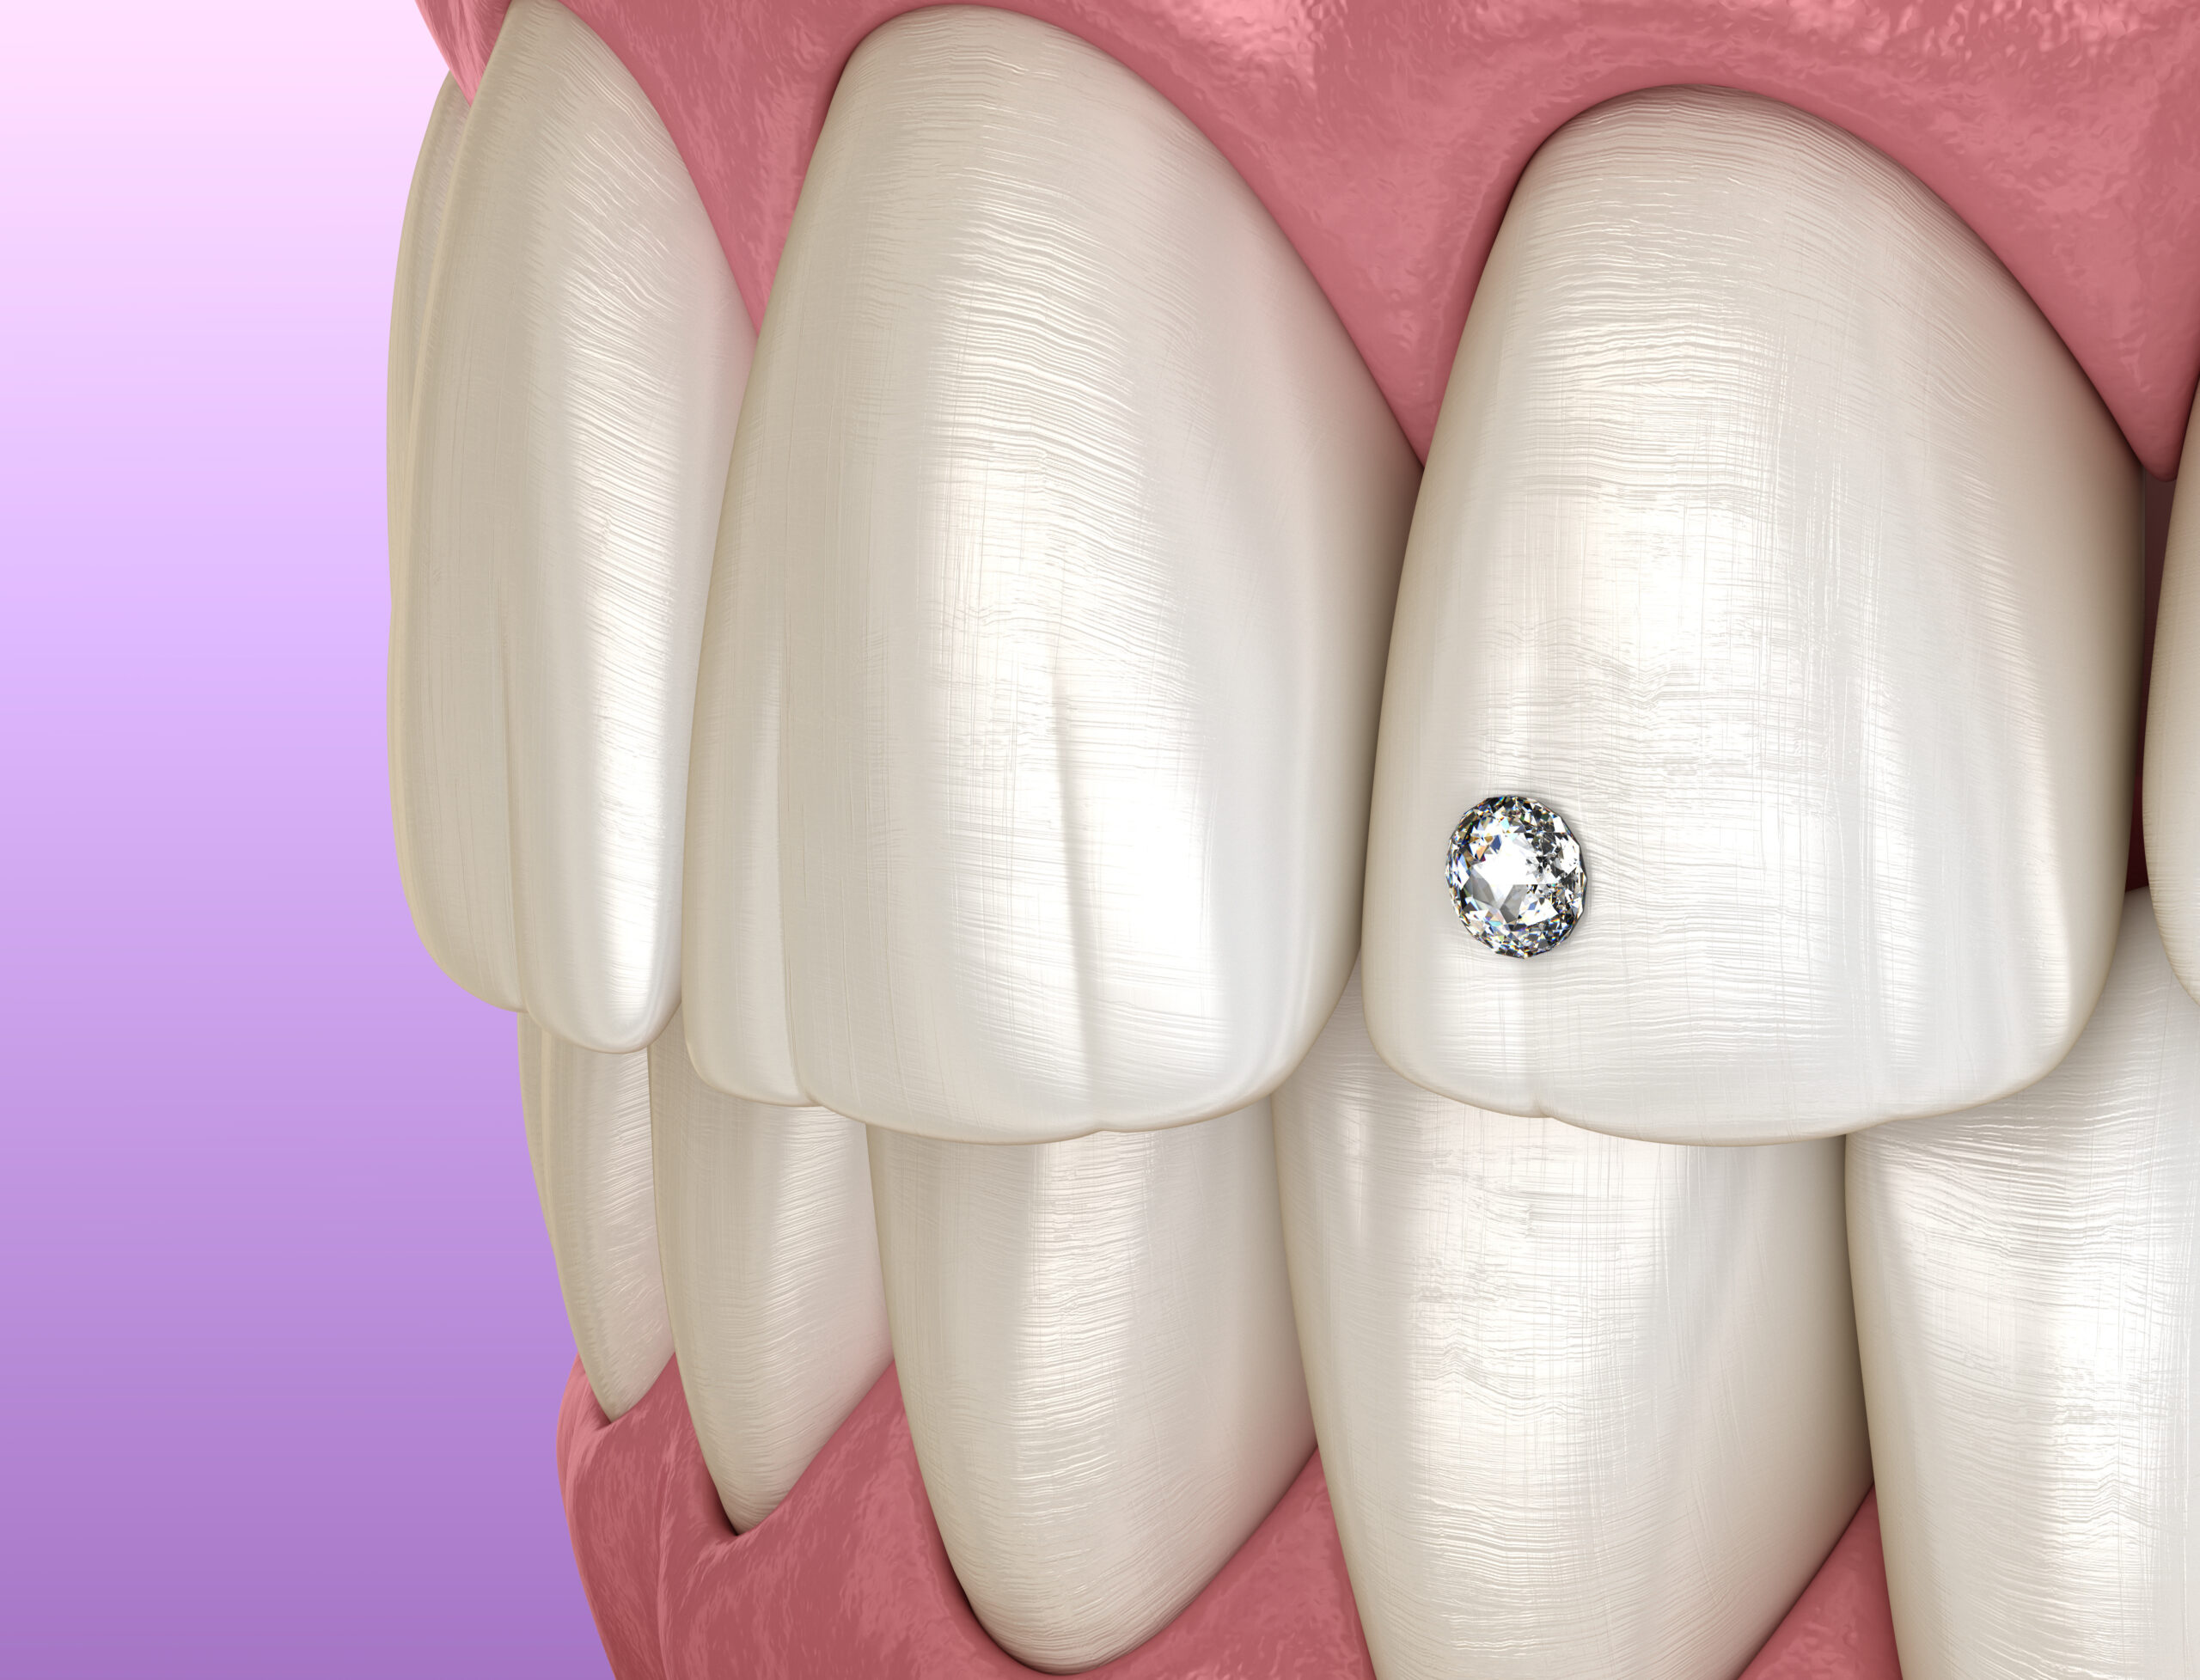 Have You Heard About Tooth Jewelry?